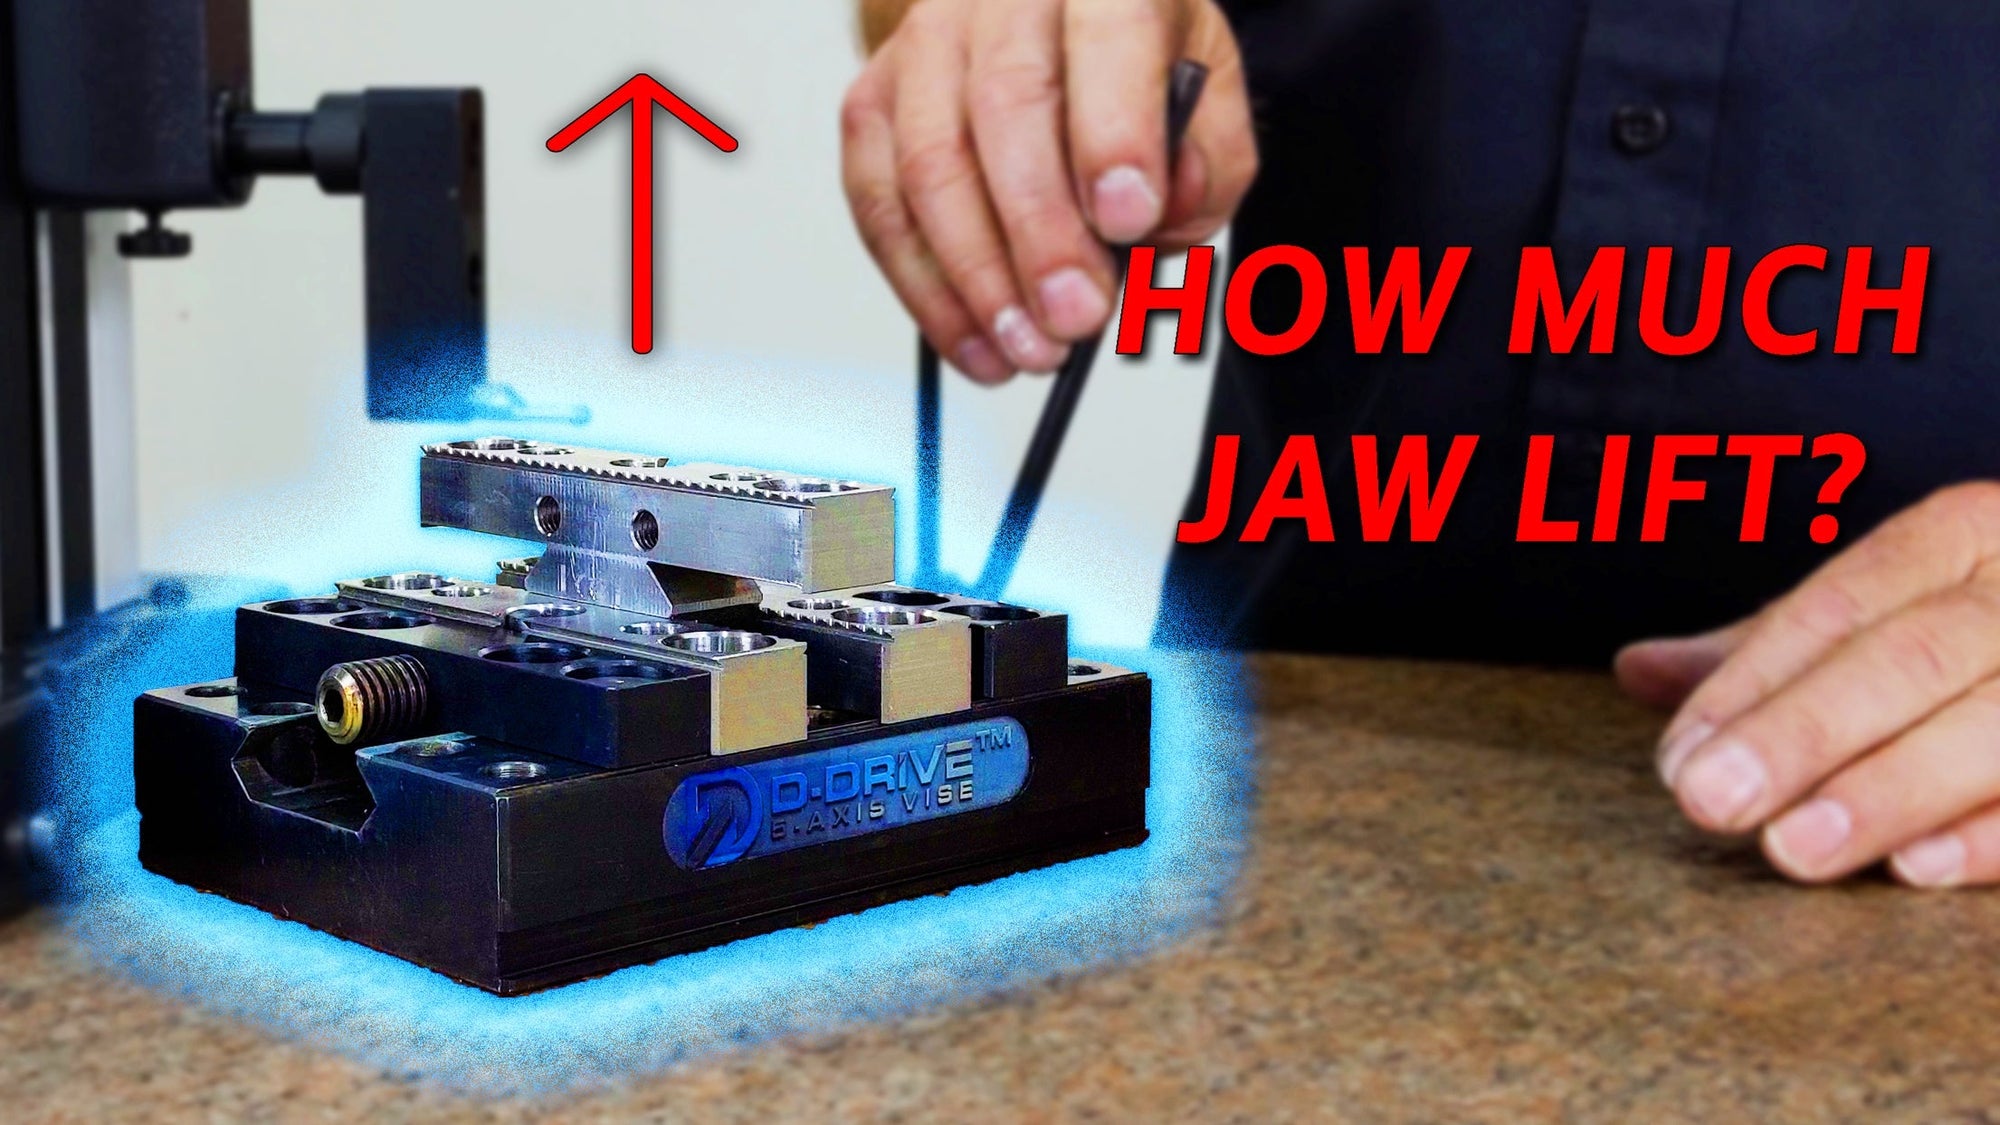 Does The D-Drive Vise Jaw Lift?